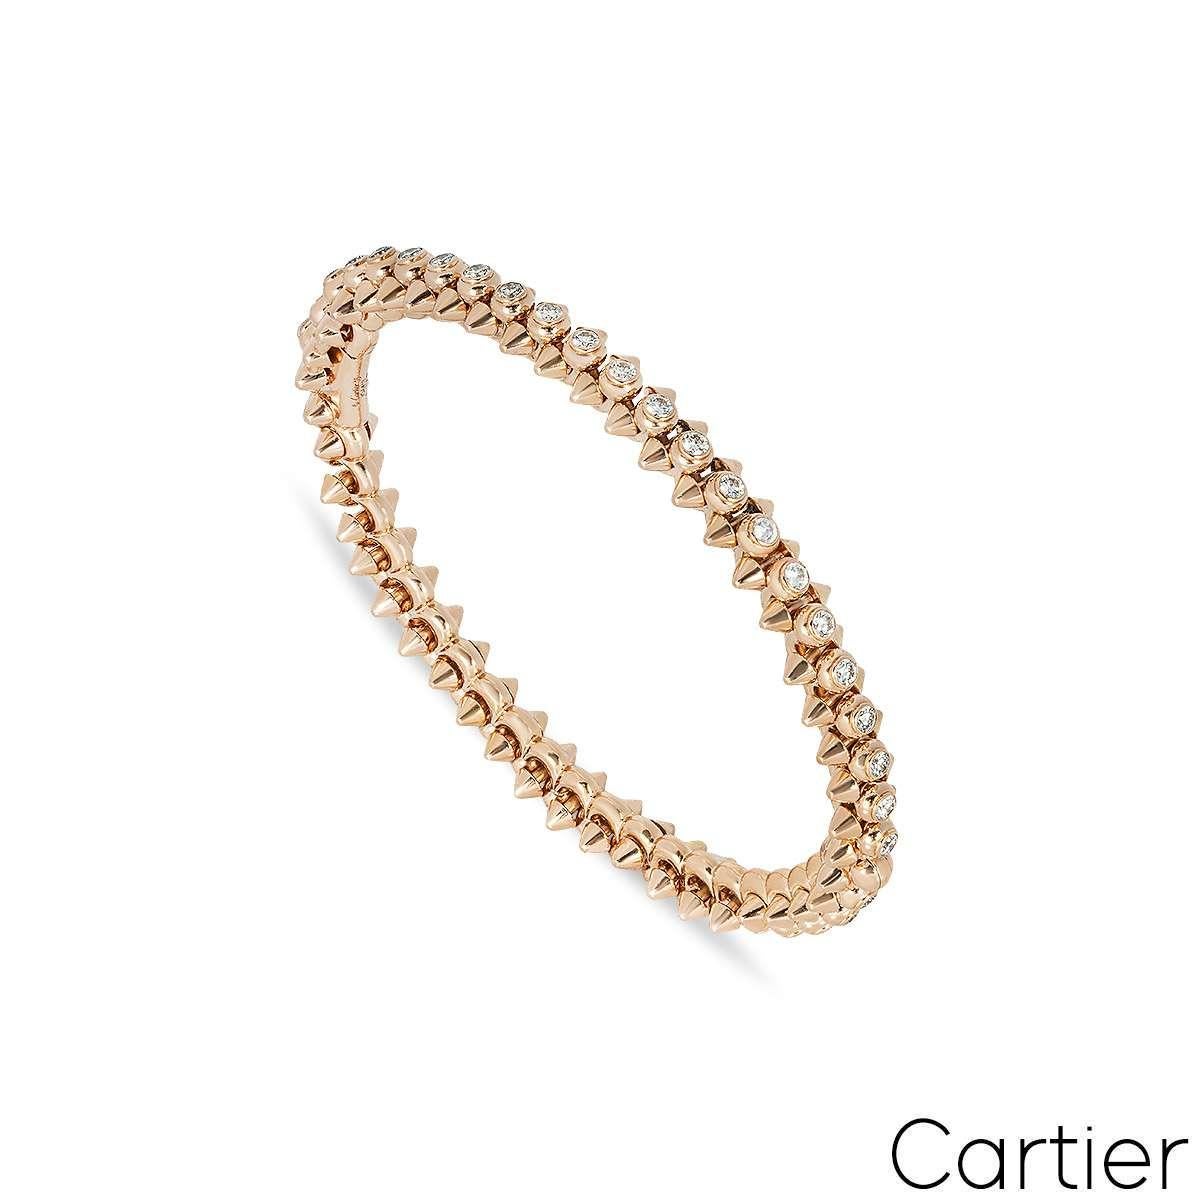 An 18k rose gold bracelet, from Cartier's Clash de Cartier collection. The bracelets design is composed of the centre being set throughout with 51 brilliant-cut diamonds totalling 1.51ct which are complemented by a stud design on either side.The